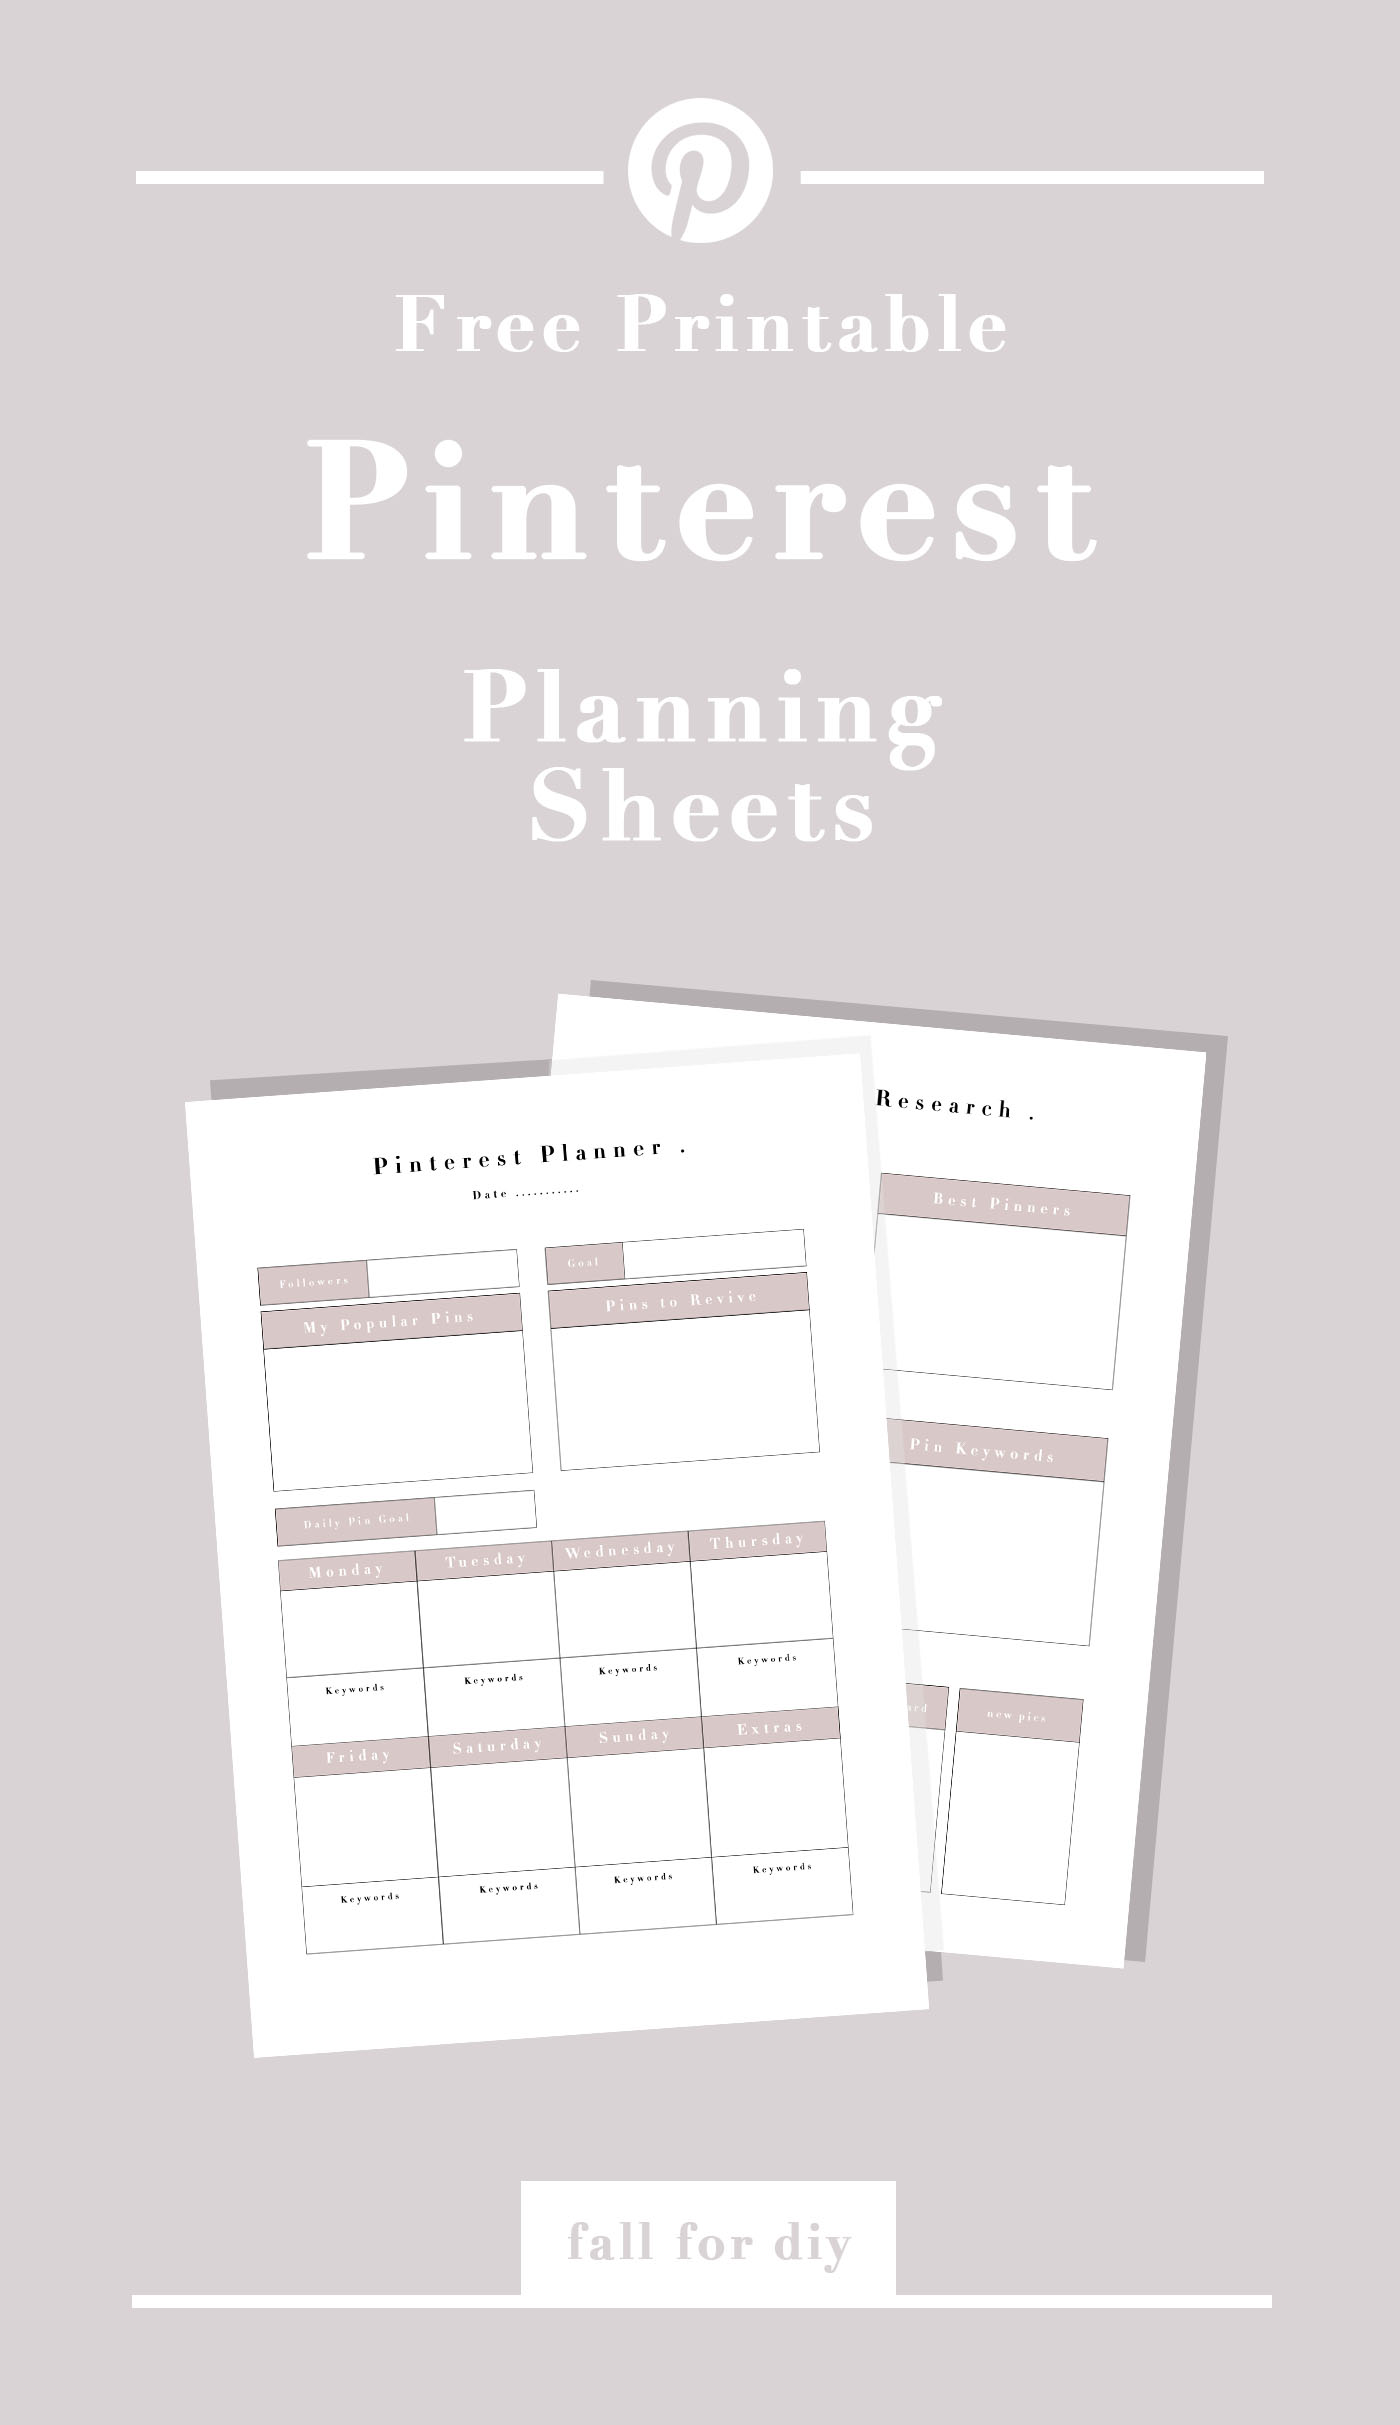 Get these Free Printable Social Media Pinterest Planners and start strategising your pins for maximum exposure. Pin like a boss!